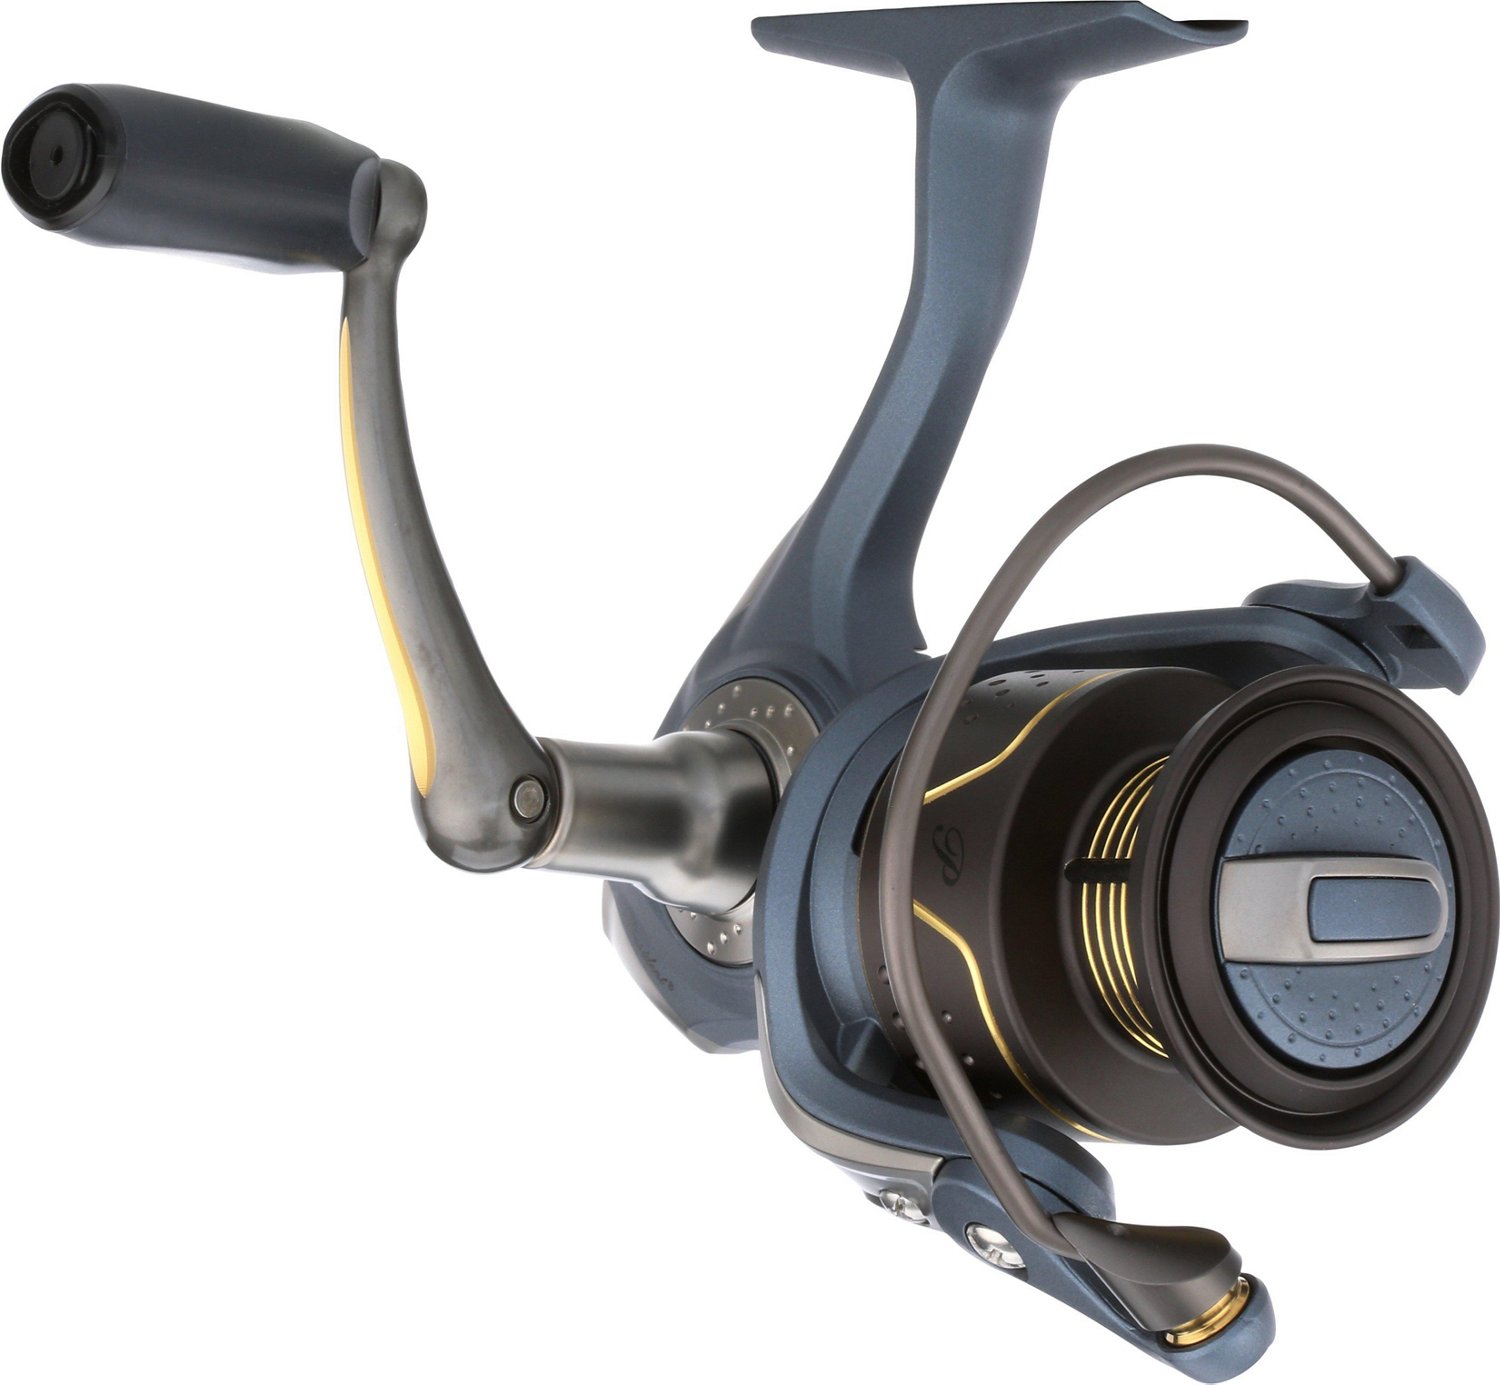 https://academy.scene7.com/is/image/academy//fishing-reels/pflueger-president-spinning-reel--pres20x-/7d4800115be846b4a5141b245a90de3c?$d-plp-product-image$